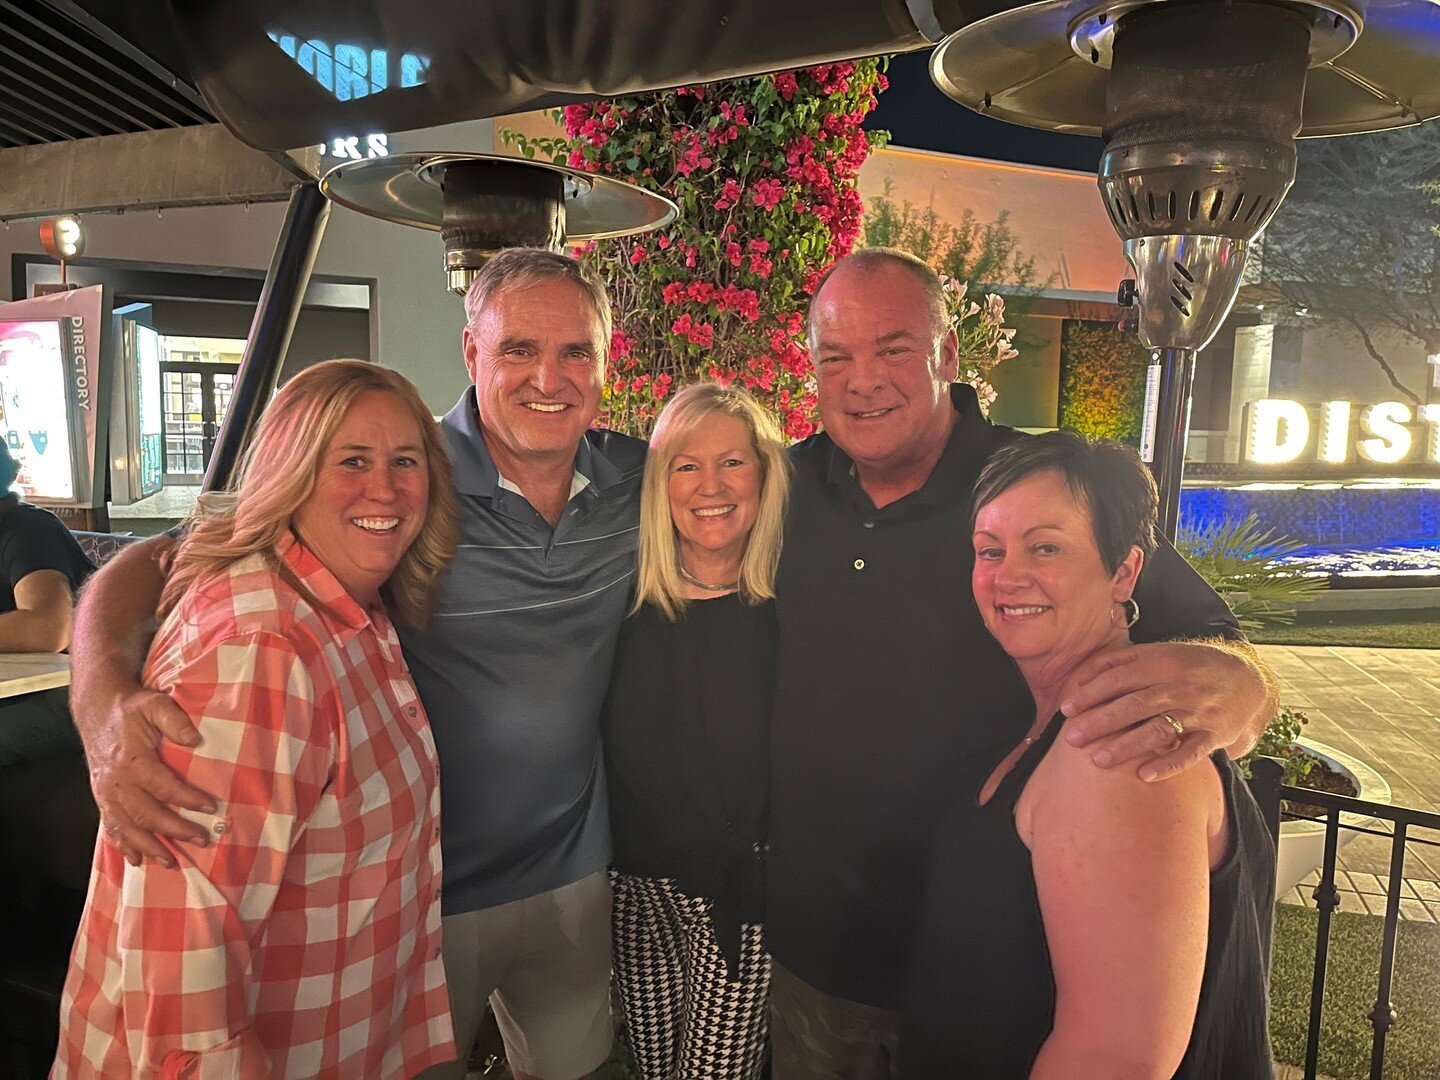 What I'm Doing: Reconnecting w/College Friends⁠
⁠
Dinner with Jeanne (Lammers) &amp; Shane Holmberg, Karen Christensen and Louon. ⁠
⁠
It's amazing how when you get with good friends you just pick up the conversation where you left off ... 30-years ag